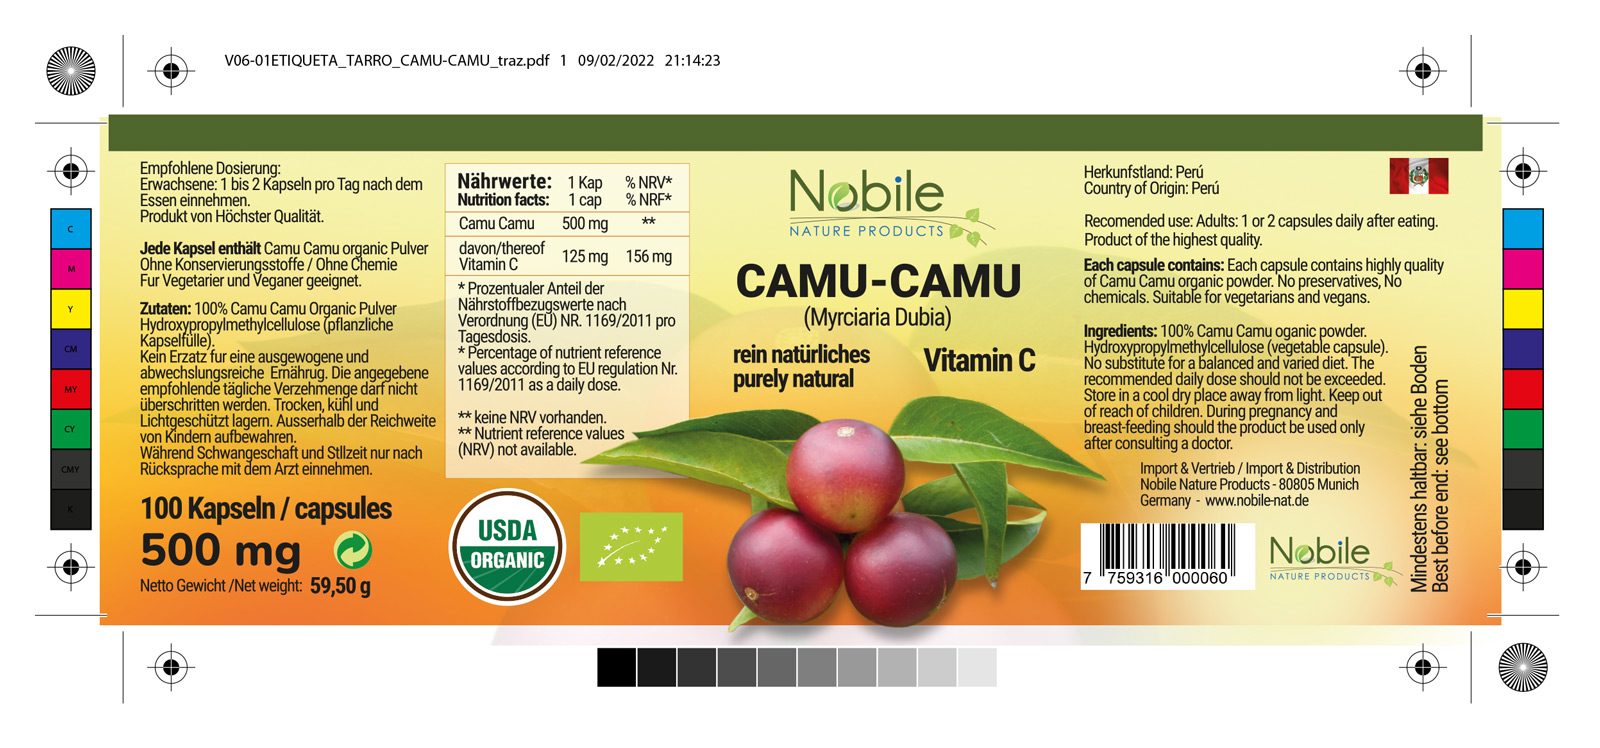 Portfolio of graphic and creative design of label and packaging design for bio products CAMU CAMU from NOBILE NATURE PRODUCTS